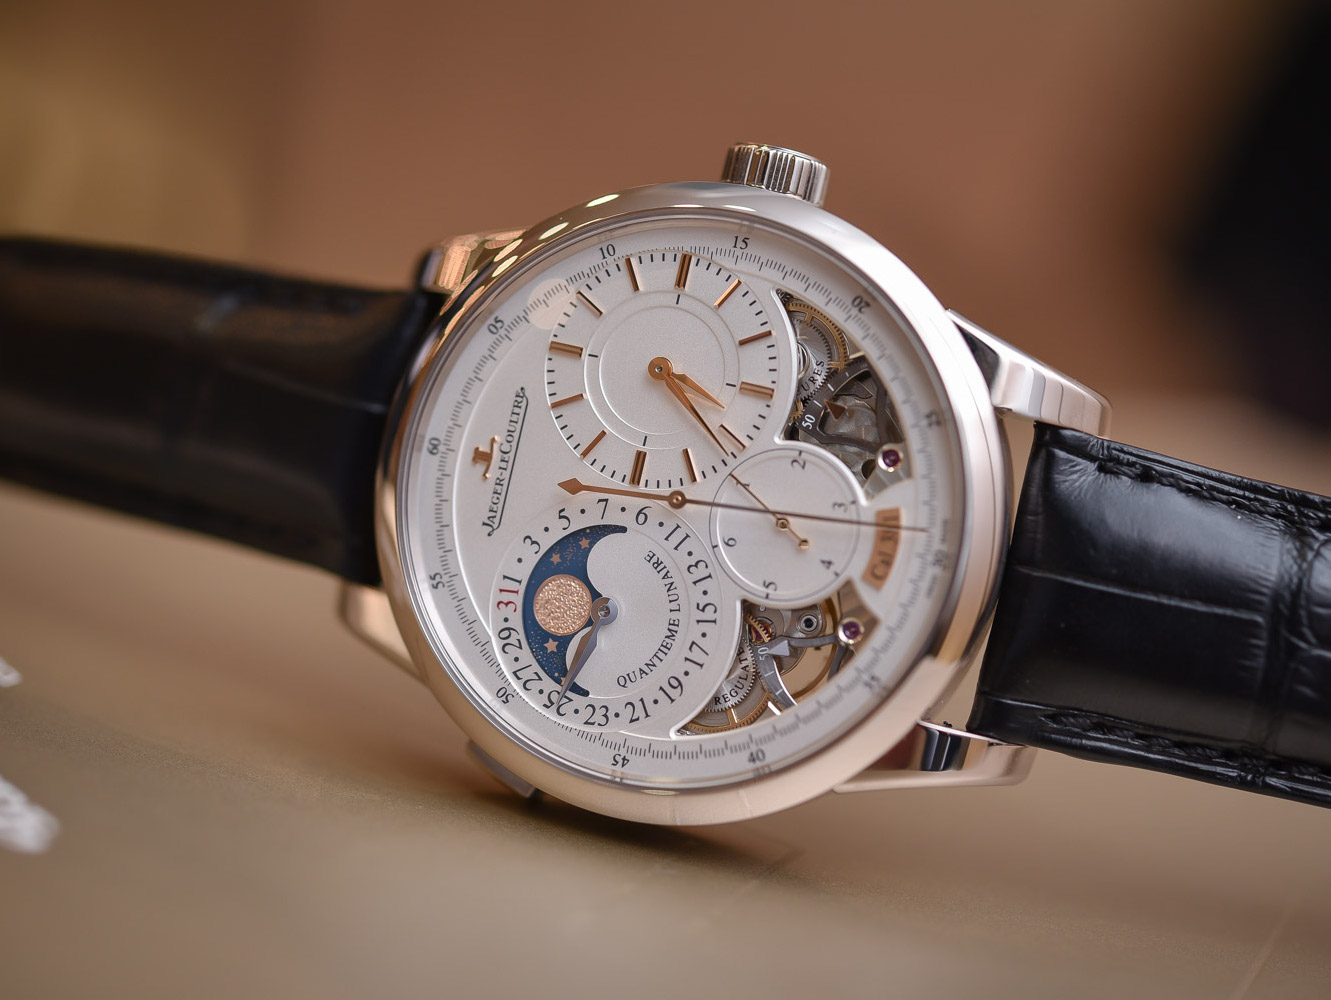 Jaeger-LeCoultre-Duometre-Quantieme-Lunaire-in-white-gold-and-opened-dial-2.jpeg